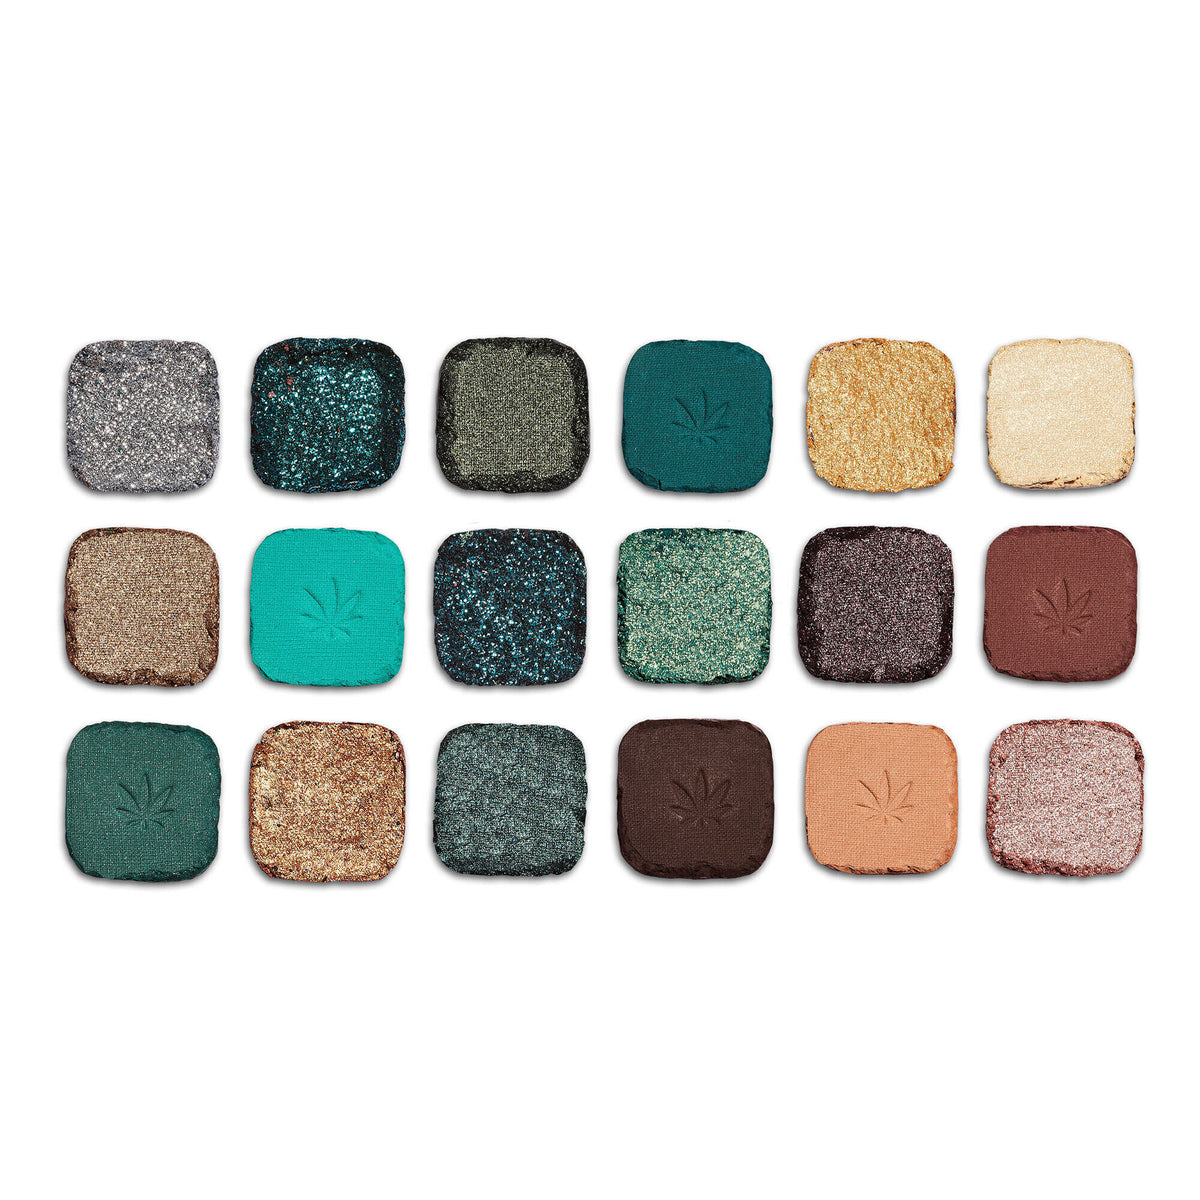 Makeup Revolution Forever Flawless Chilled With Cannabis Sativa Eyeshadow Palette